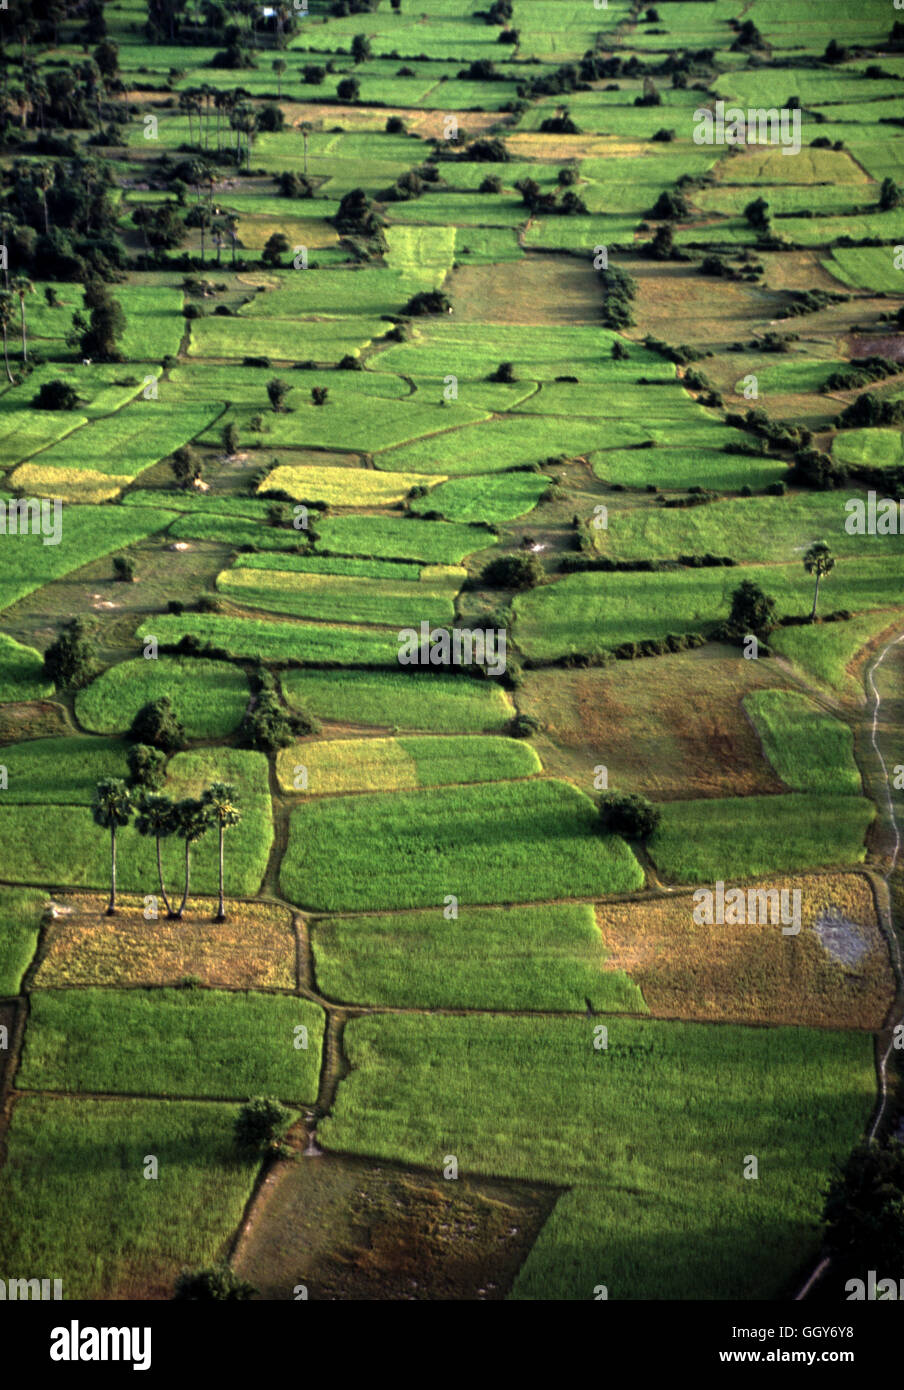 Aerial view of rice fields from the Aerophile tethered gas balloon. Siem Reap - Cambodia Stock Photo